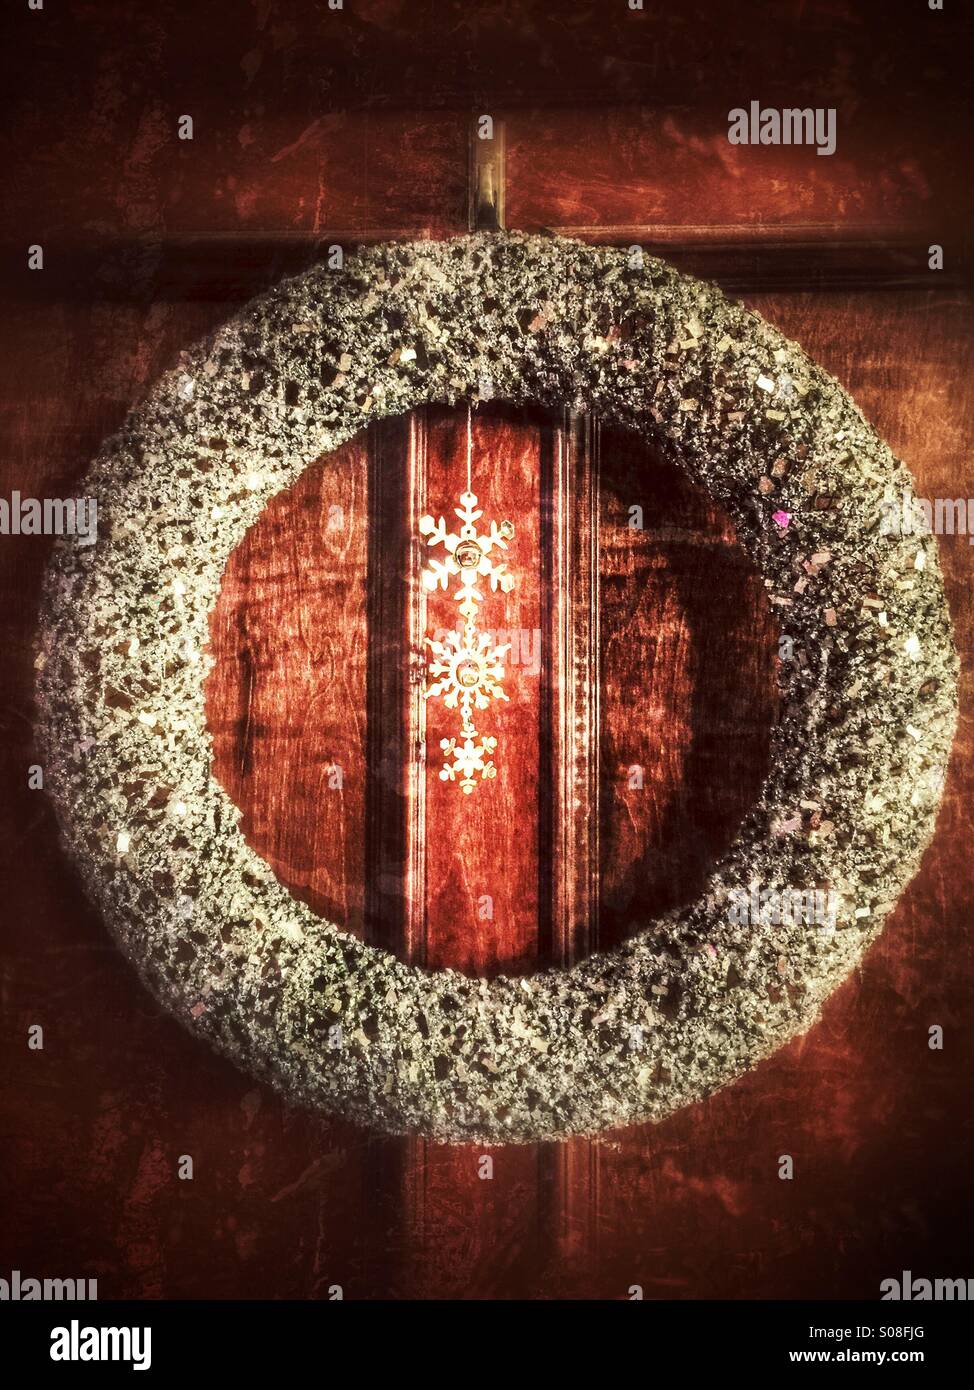 A silver Christmas wreath having on wood paneling Stock Photo